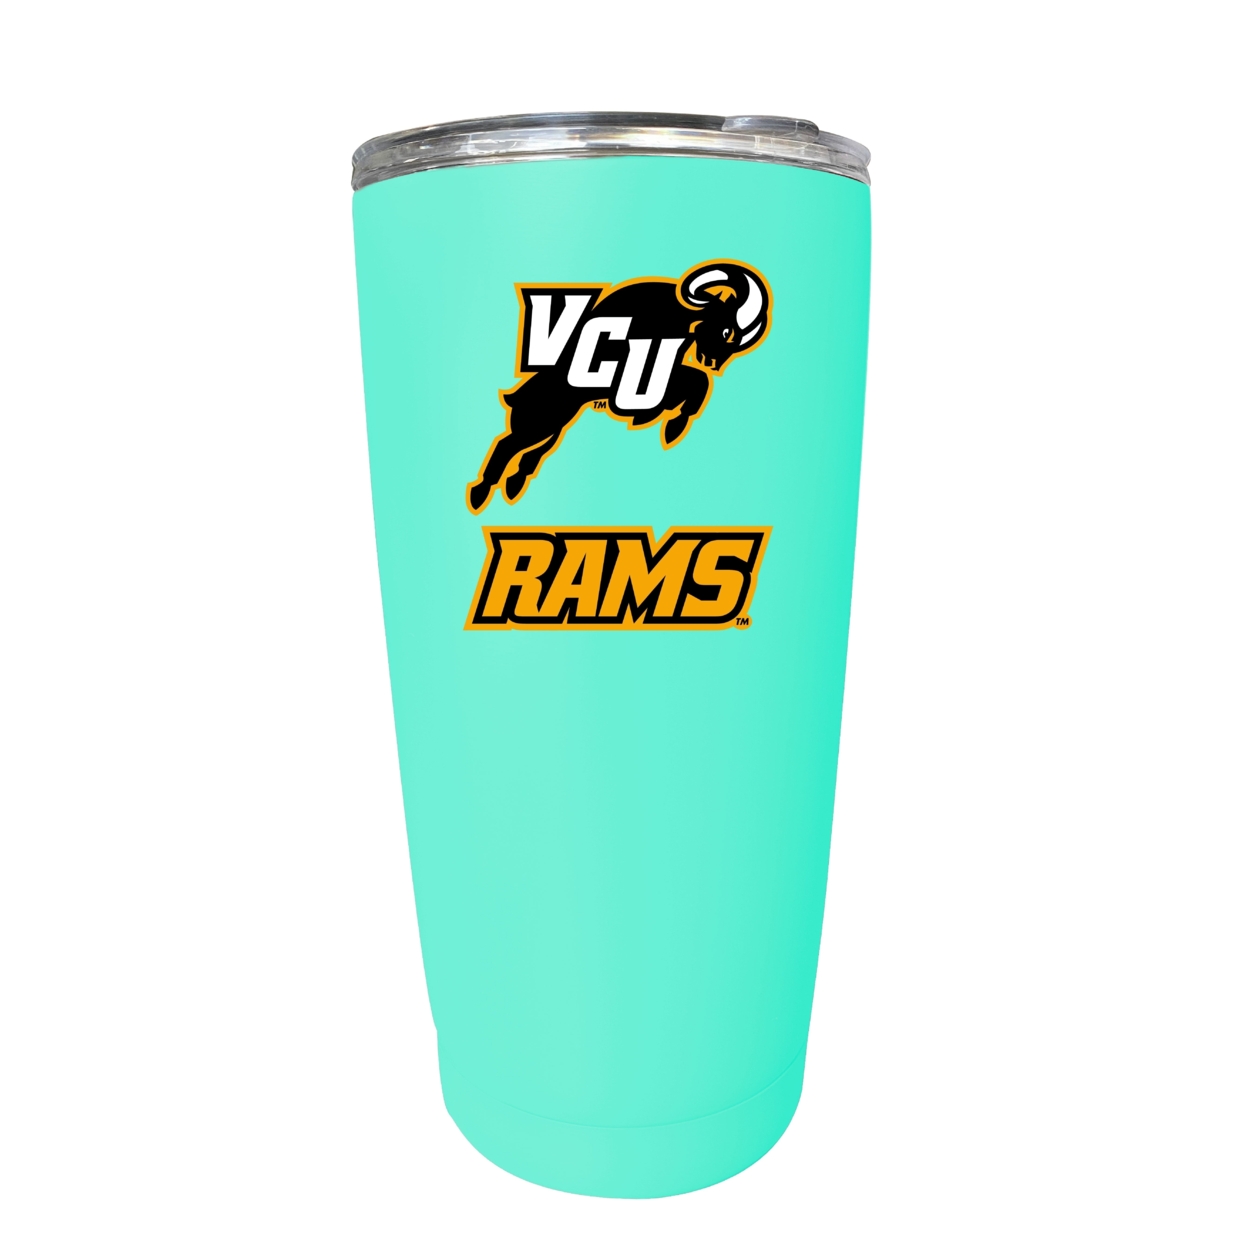 Virginia Commonwealth 16 Oz Insulated Stainless Steel Tumbler - Choose Your Color. - Seafoam